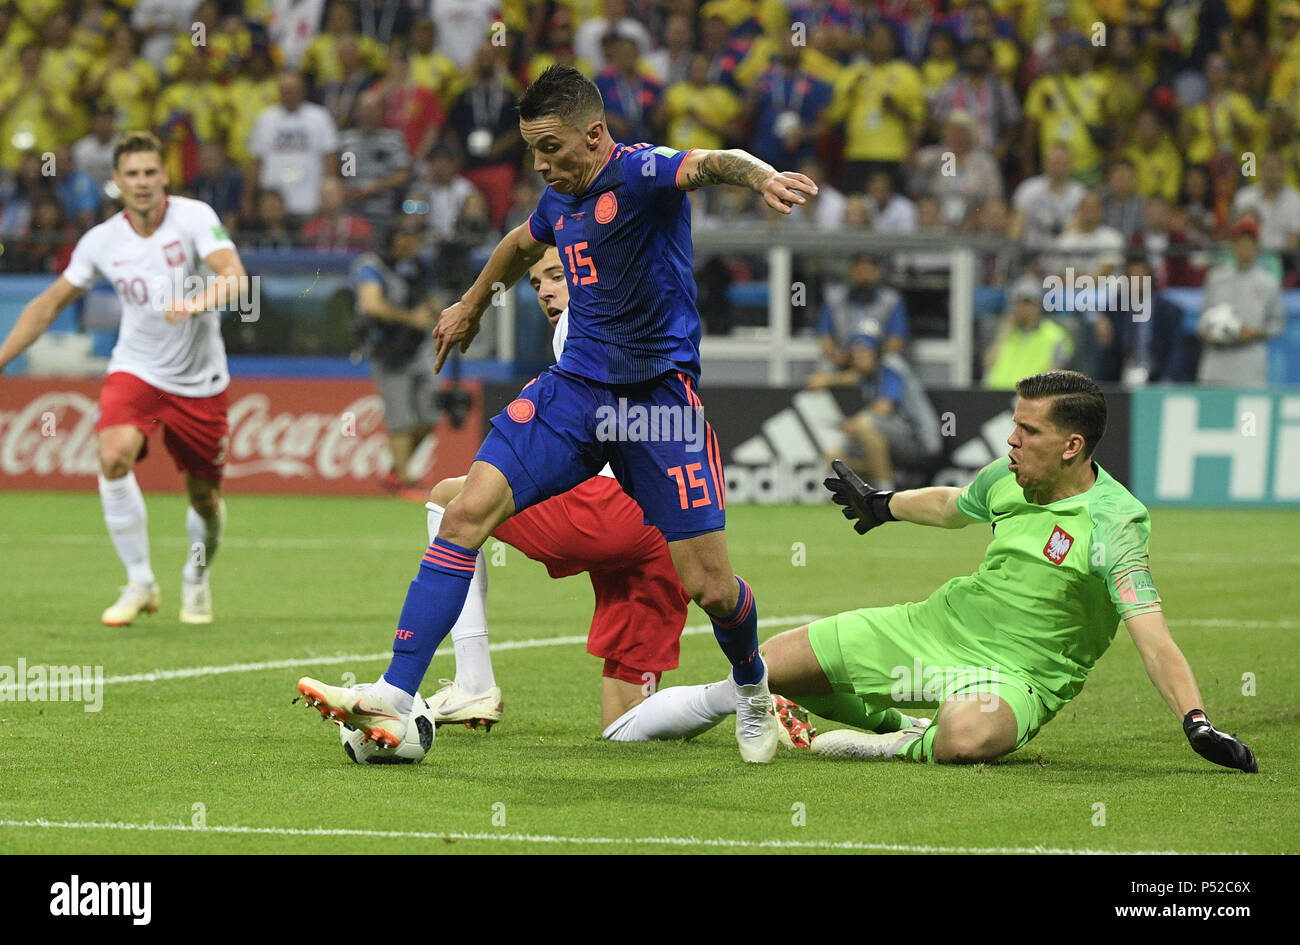 Kazan, Russia. 24th June, 2018. Mateus Uribe (front) of Colombia competes during the 2018 FIFA World Cup Group H match between Poland and Colombia in Kazan, Russia, June 24, 2018. Colombia won 3-0. Credit: Lui Siu Wai/Xinhua/Alamy Live News Stock Photo